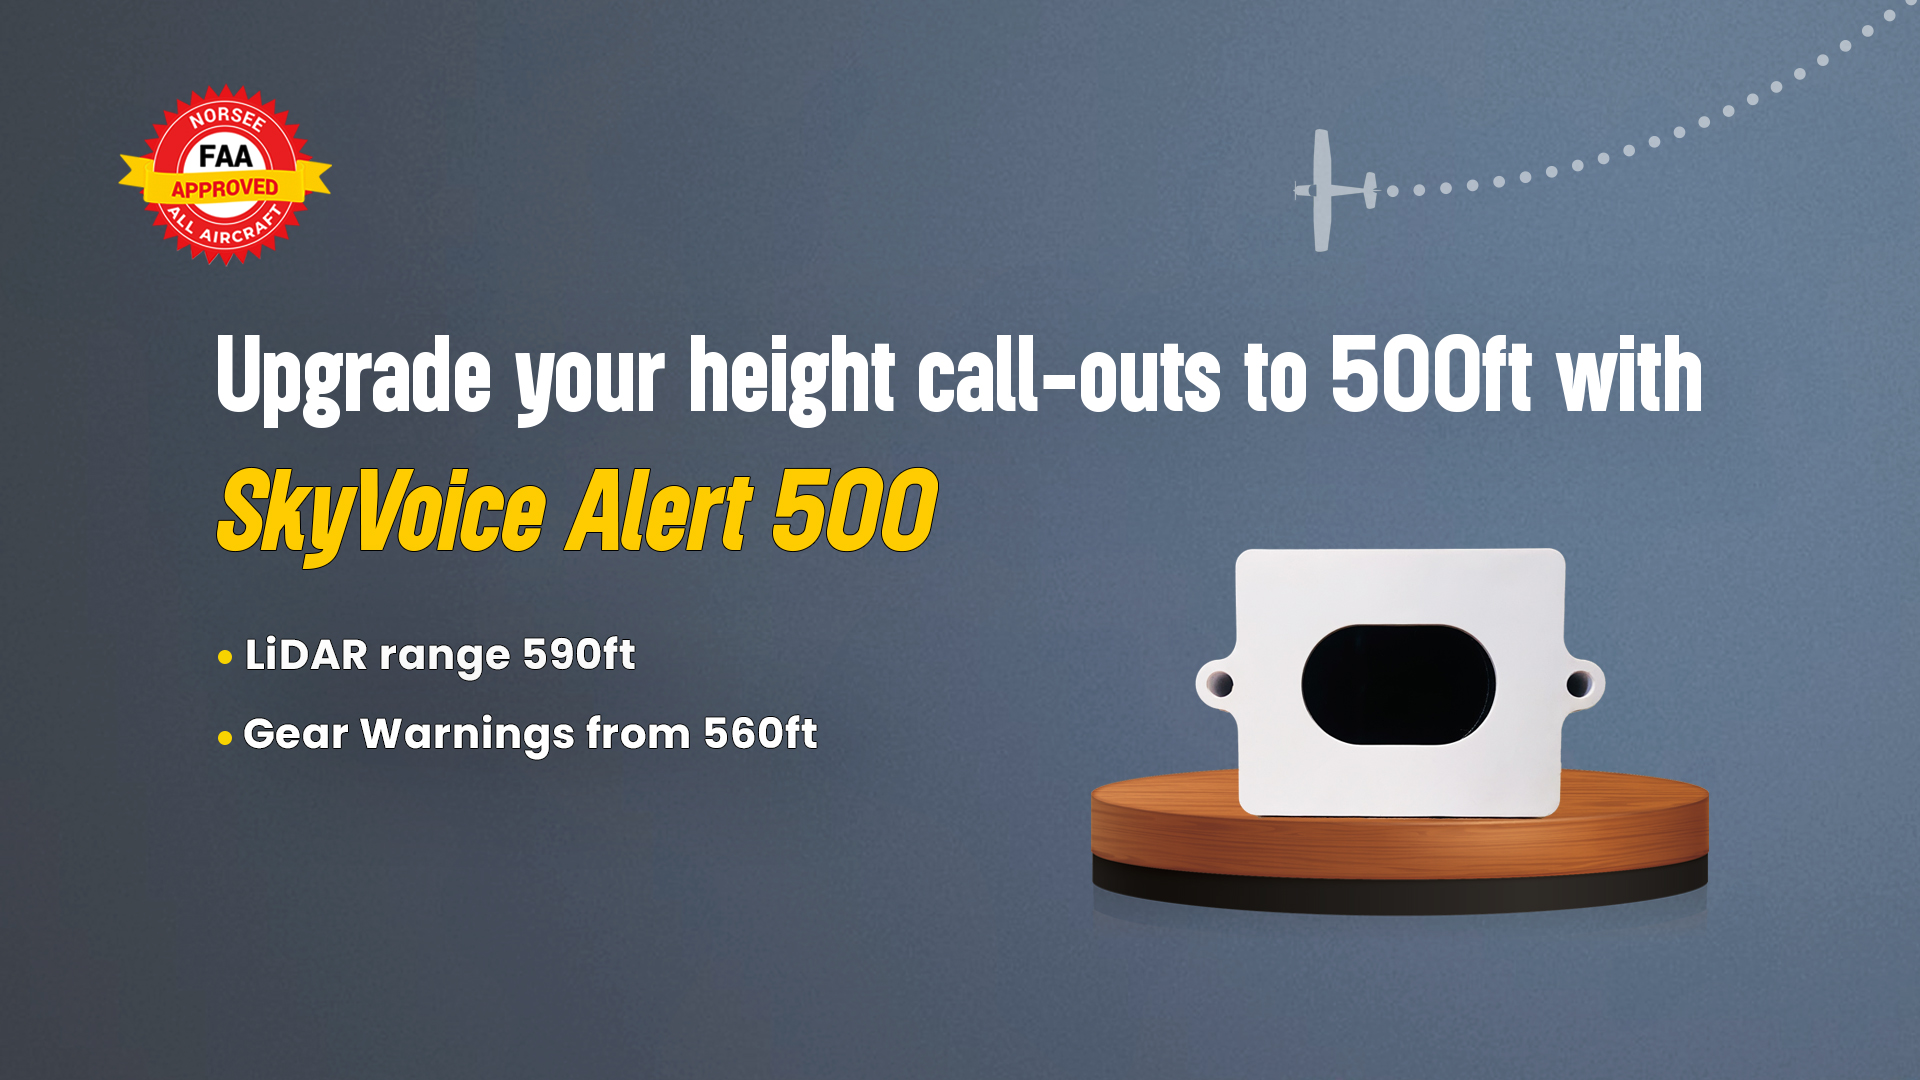 Upgrade your height call-outs to 500ft with SkyVoice Alert 500